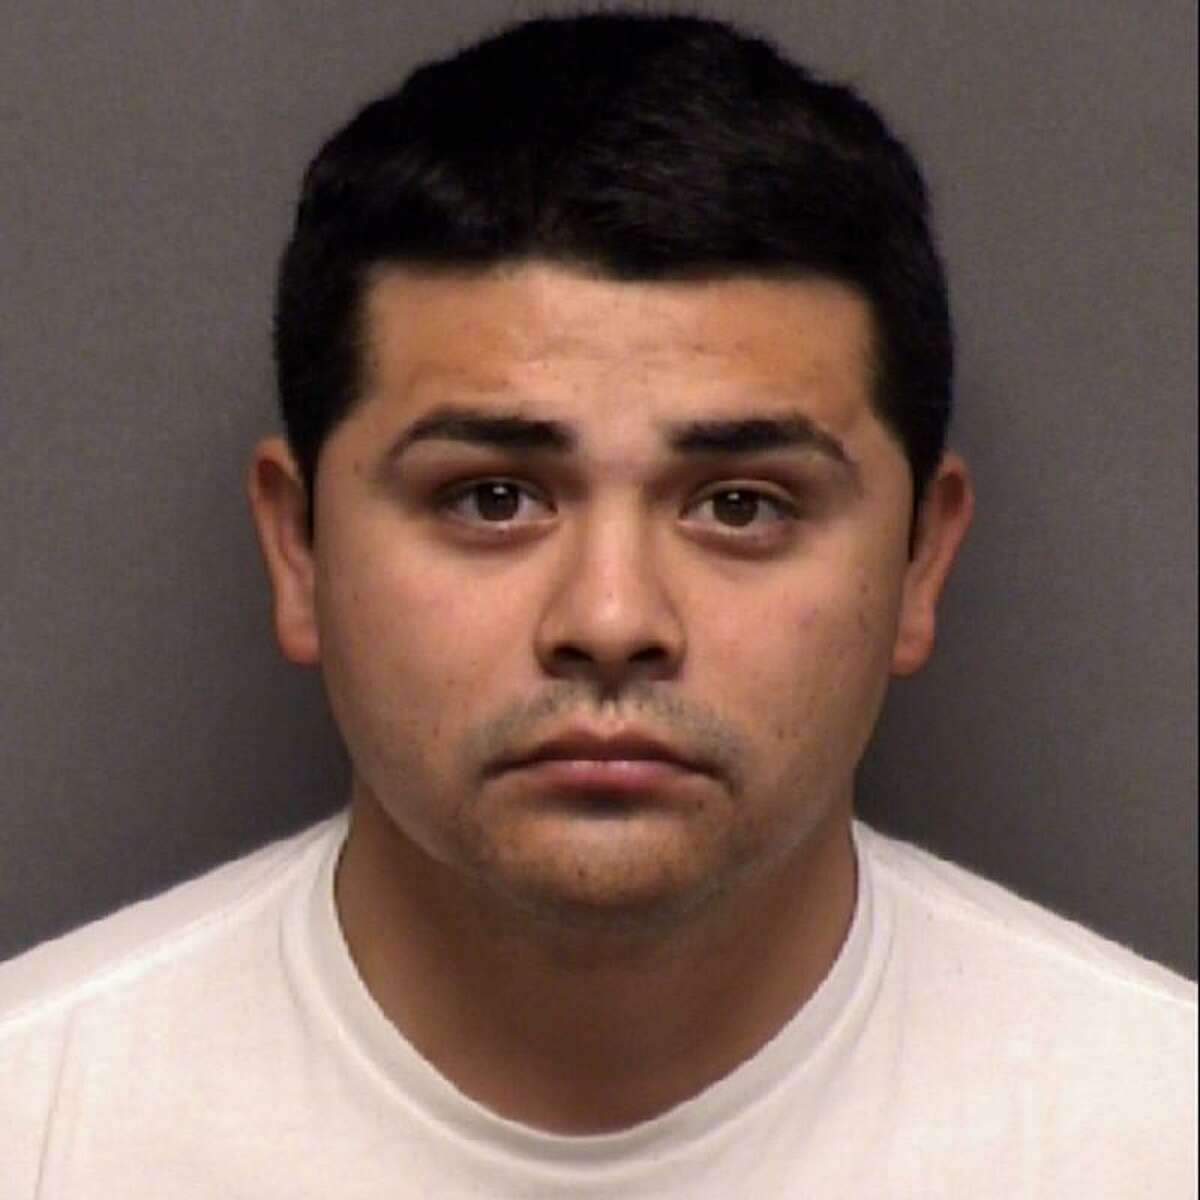 Andres Ibarra, 27, entered a plea of no contest Tuesday to indecency with a child by exposure. State District Judge Michael Mery issued a three-year sentence.